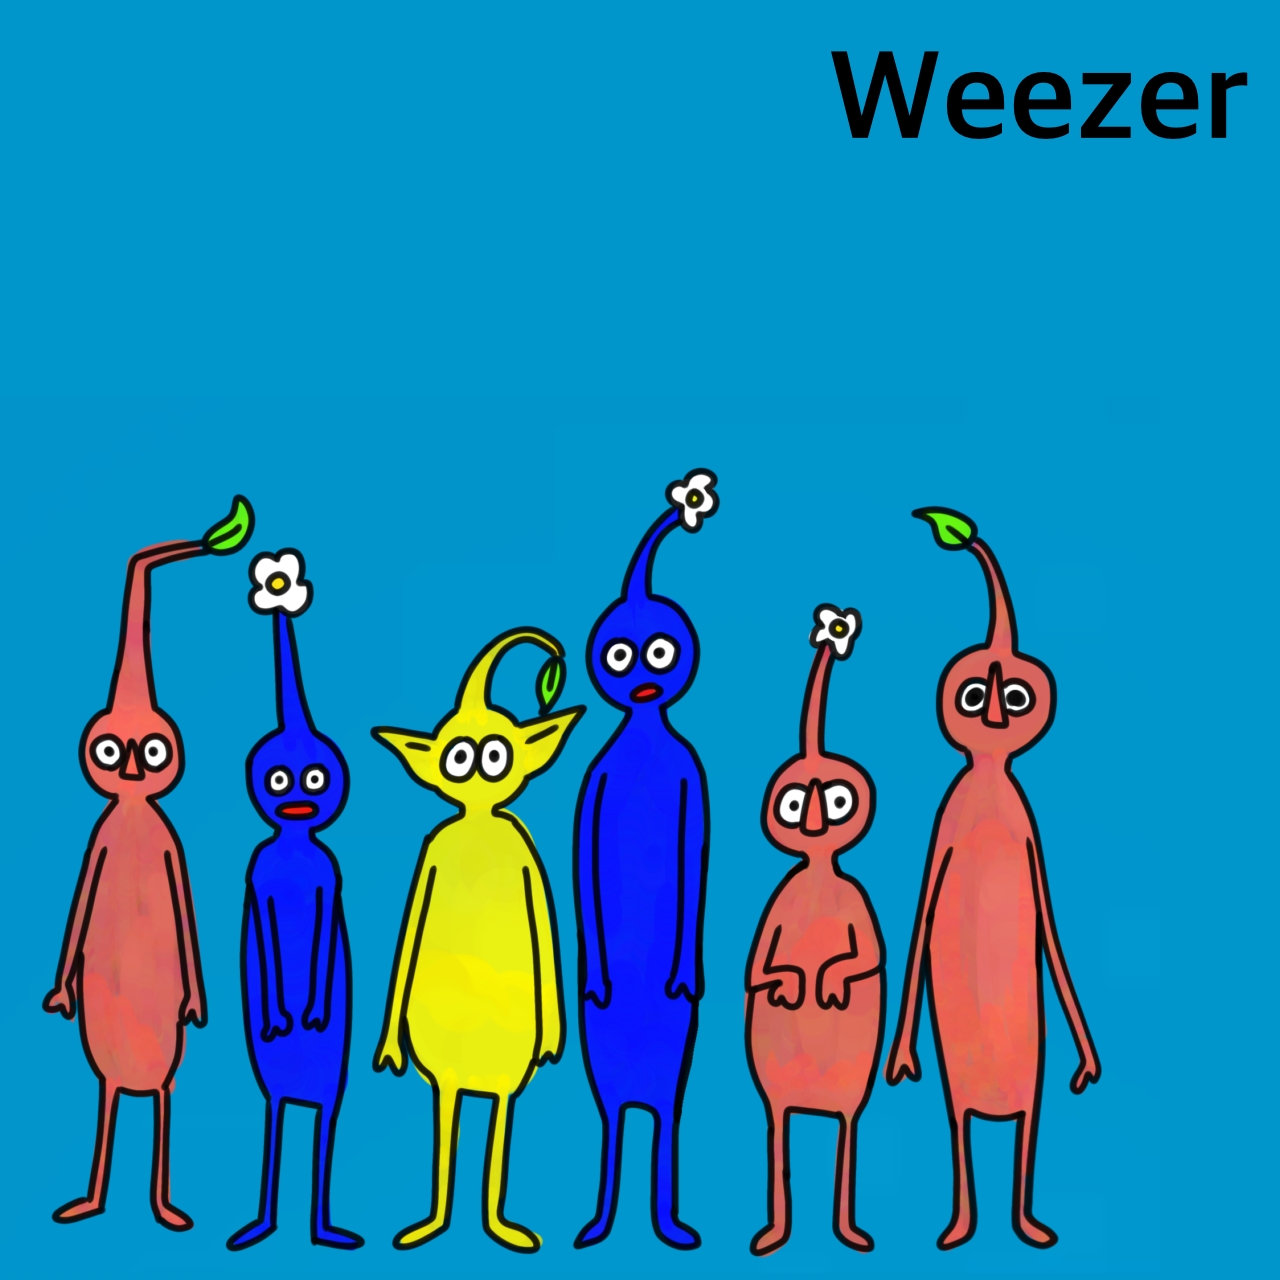 six pikmin (red, blue, yellow, blue, red, red) on weezer background. pikmin are of varying heights to represent me and my friends in our costumes.